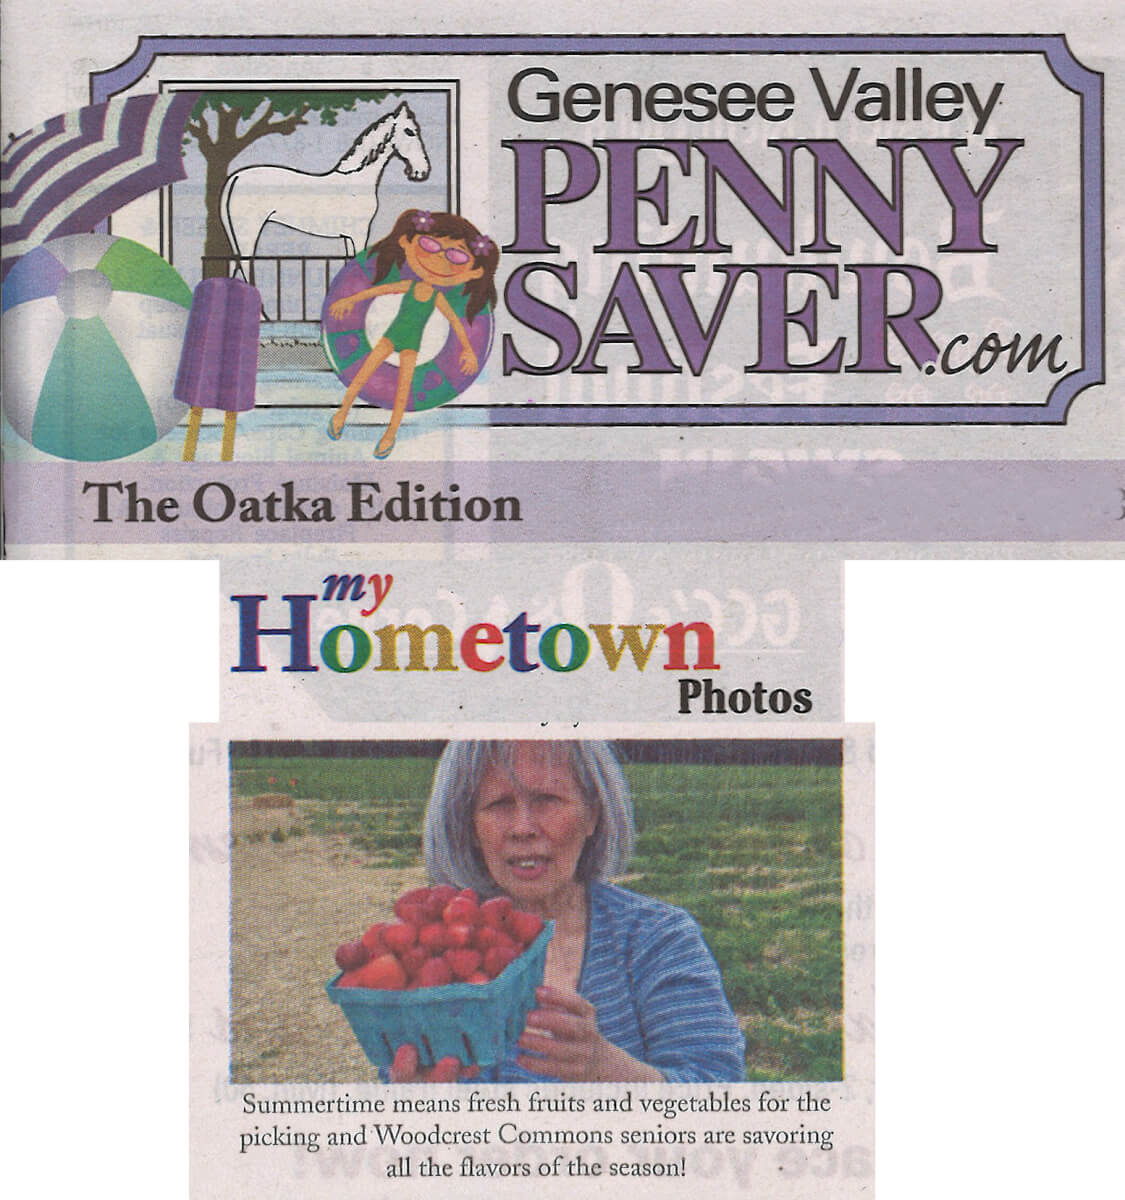 Woodcrest Commons residents pick Strawberries photo in the Genesee Valley Penny Saver August 19, 2016